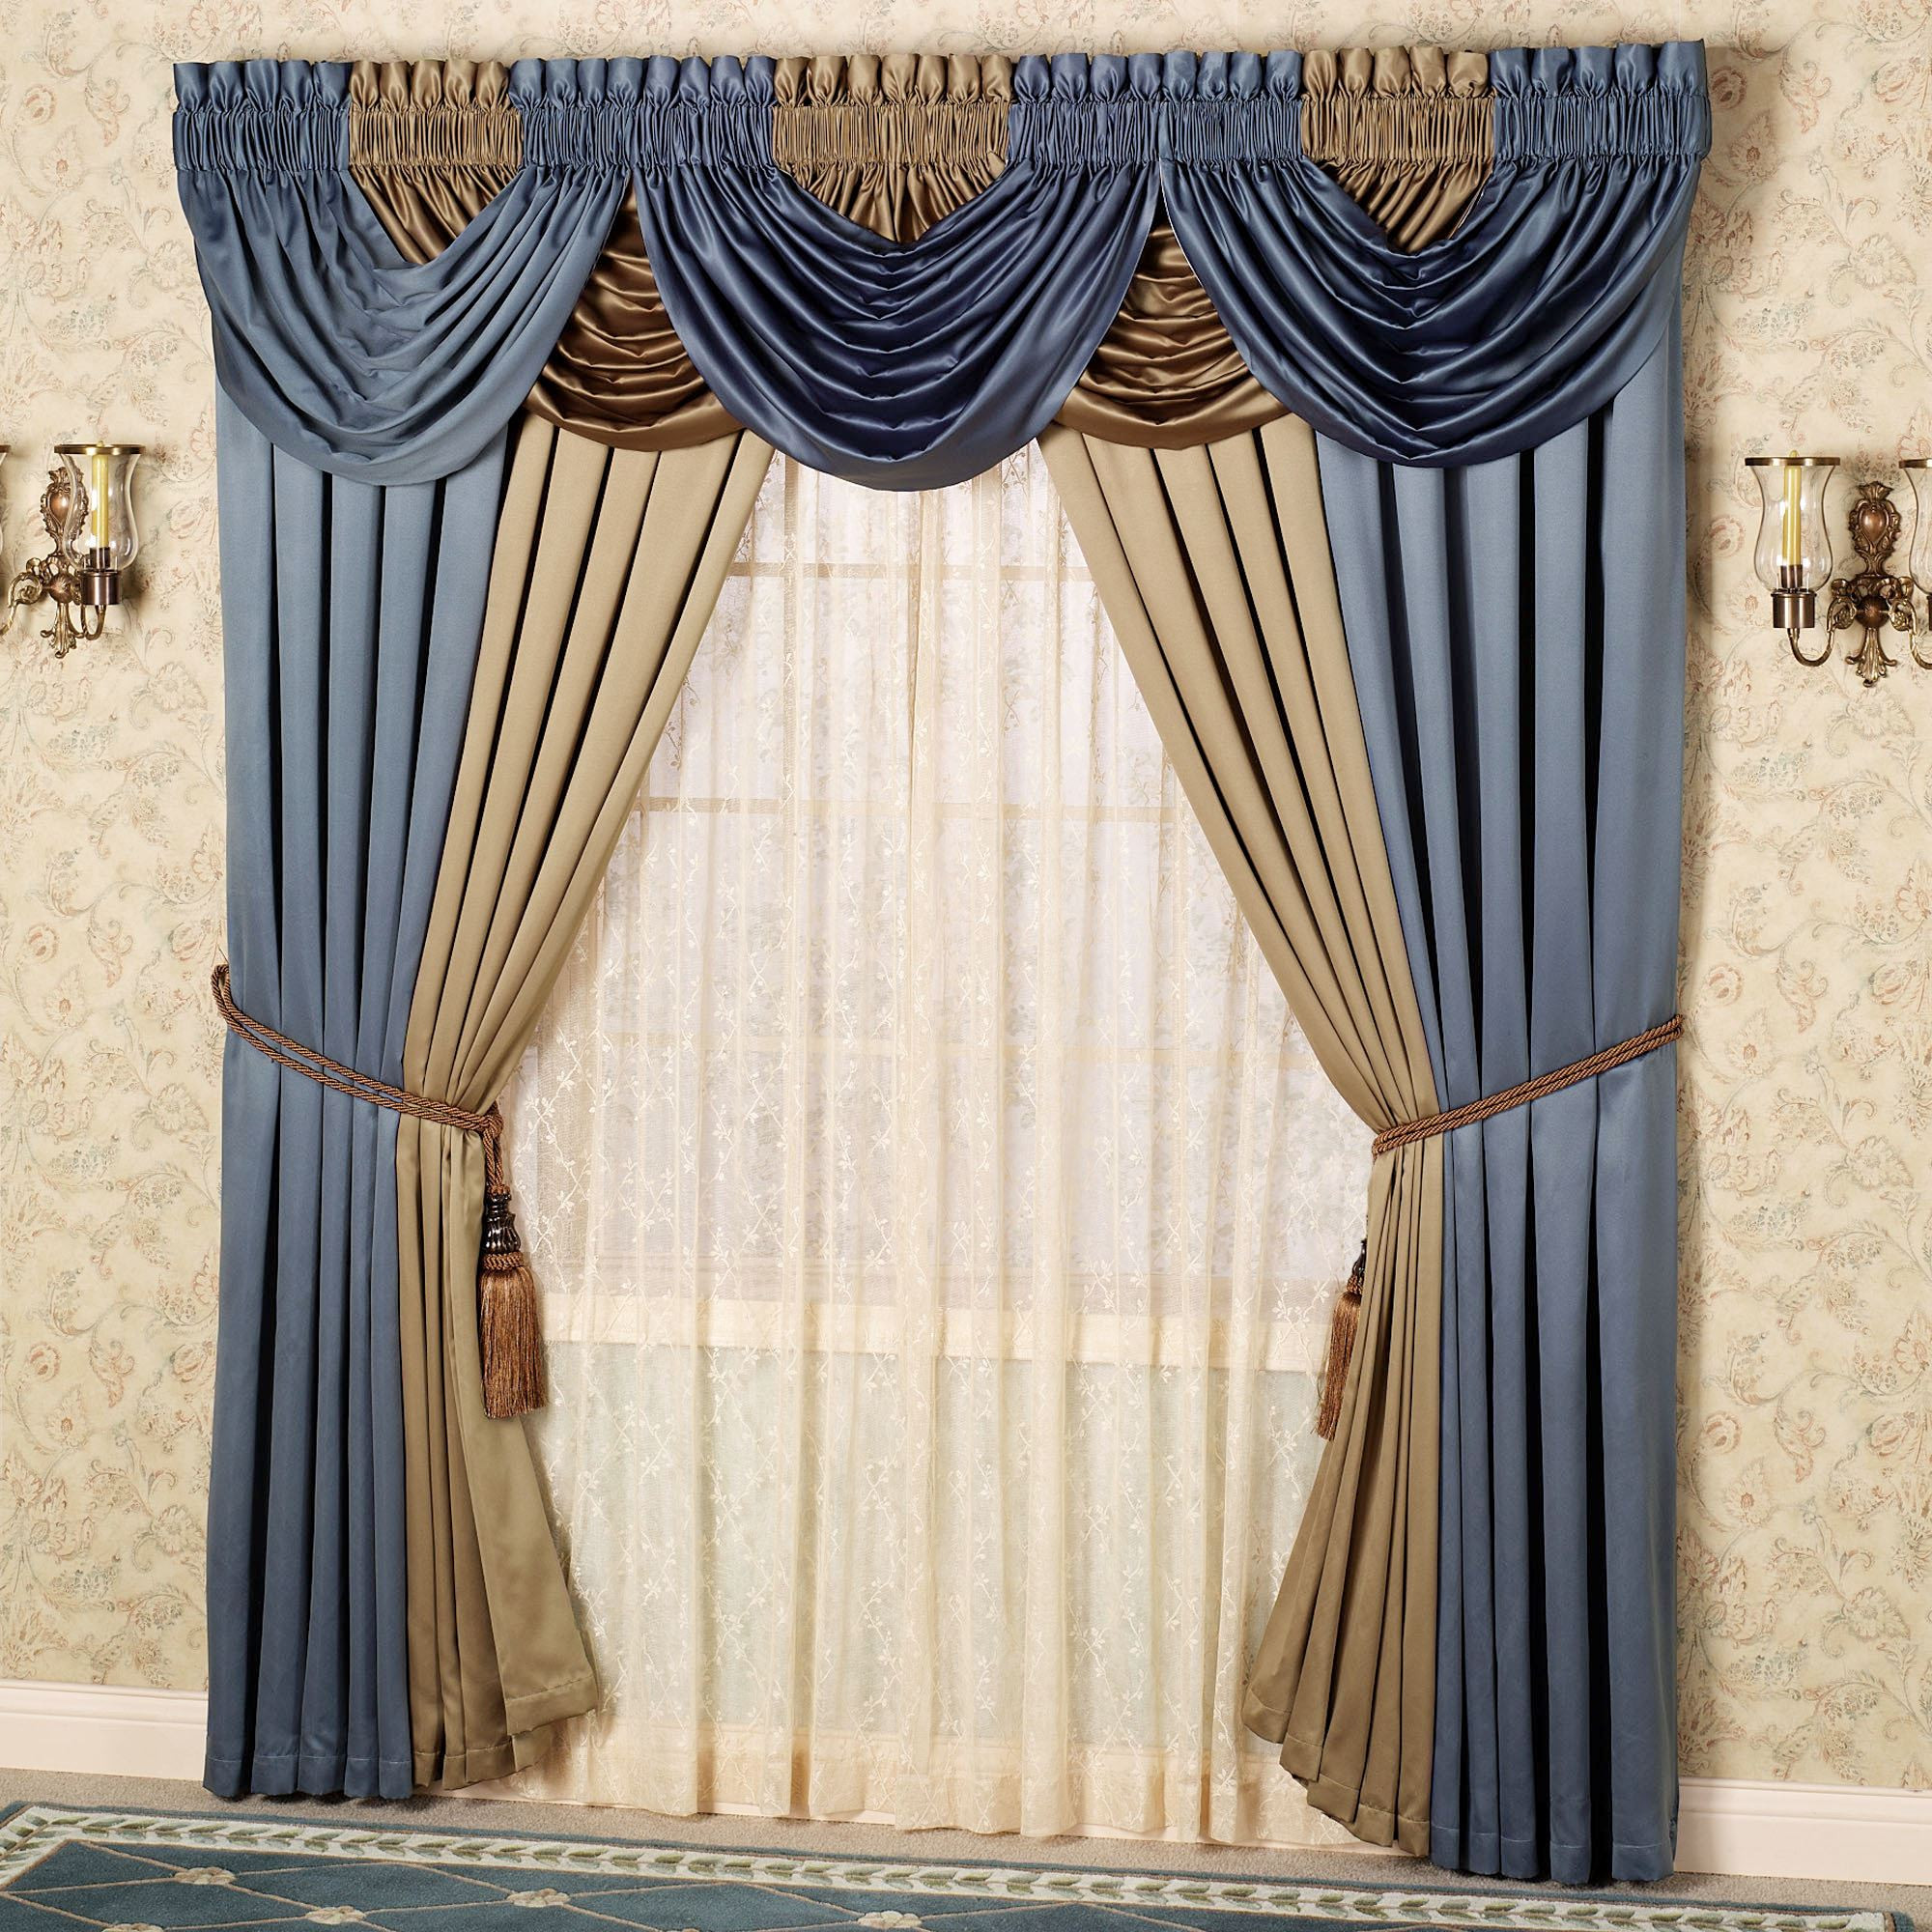 Jc Penneys Kitchen Curtains
 Curtain Enchanting Jcpenney Valances Curtains For Window